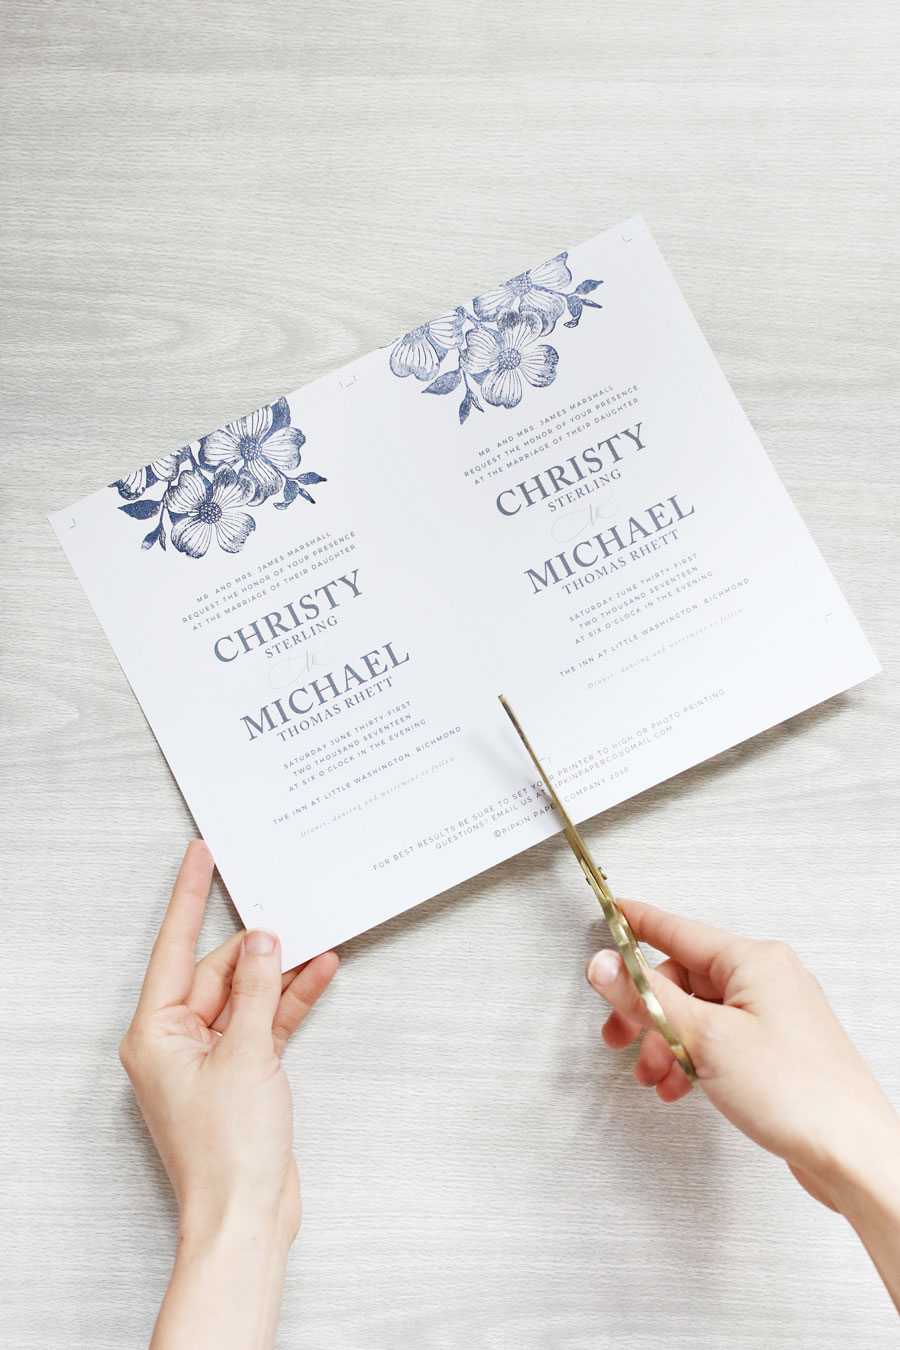 These hand-stamped floral wedding invitations make for a fun and easy DIY project. Not to mention they only cost $65 for 100 of them.